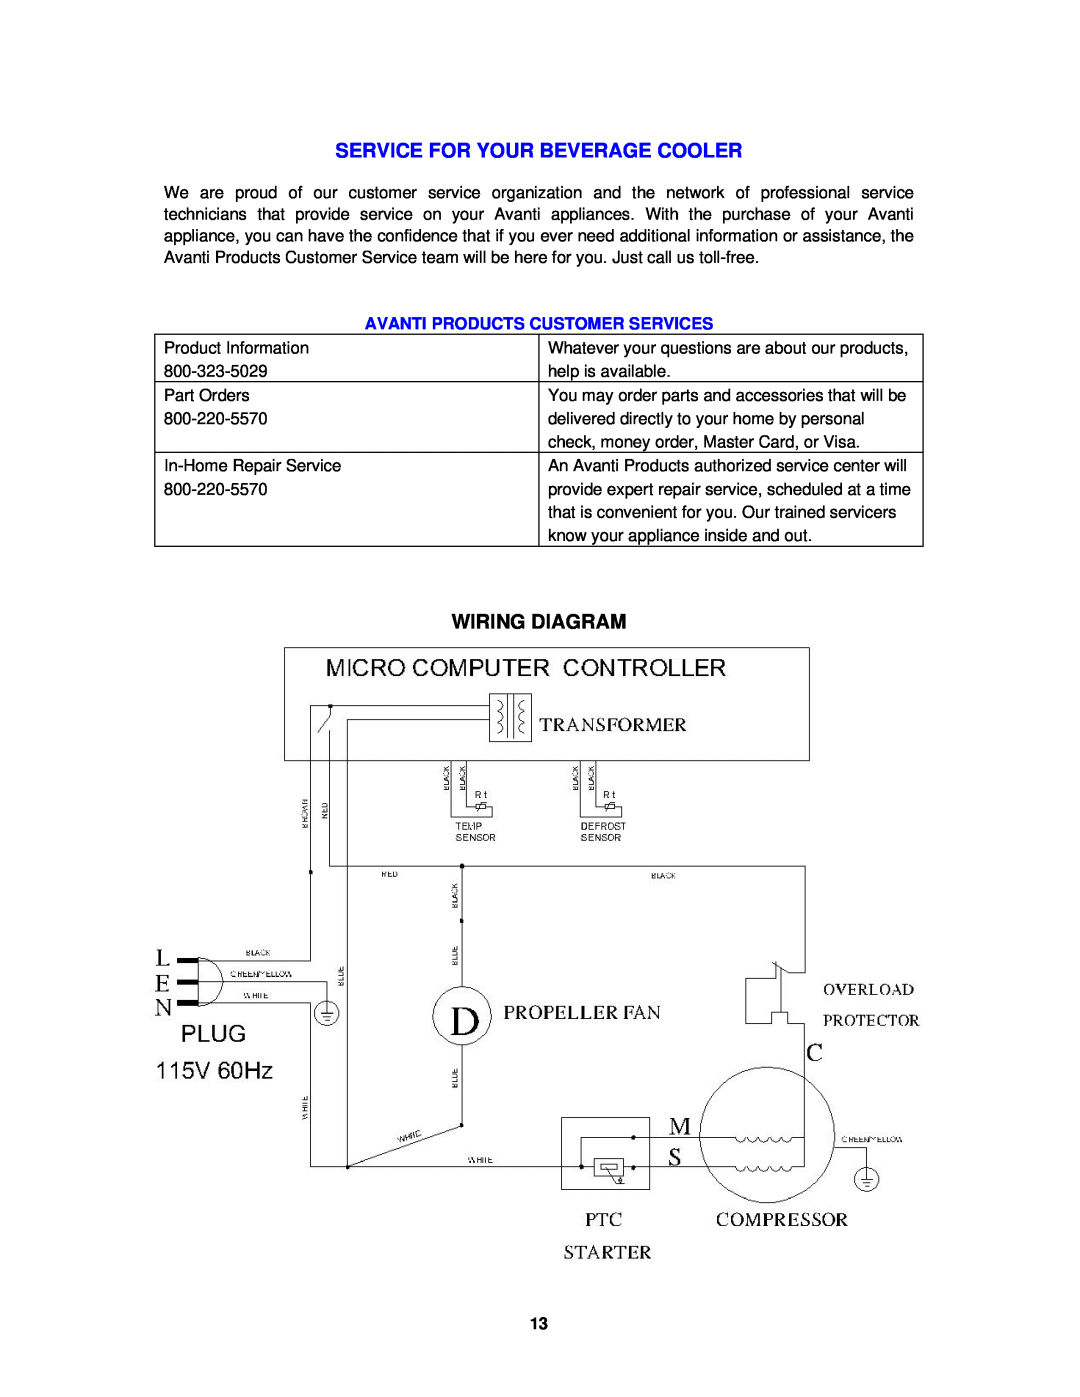 Avanti ORC2519SS instruction manual Service For Your Beverage Cooler, Wiring Diagram, Avanti Products Customer Services 